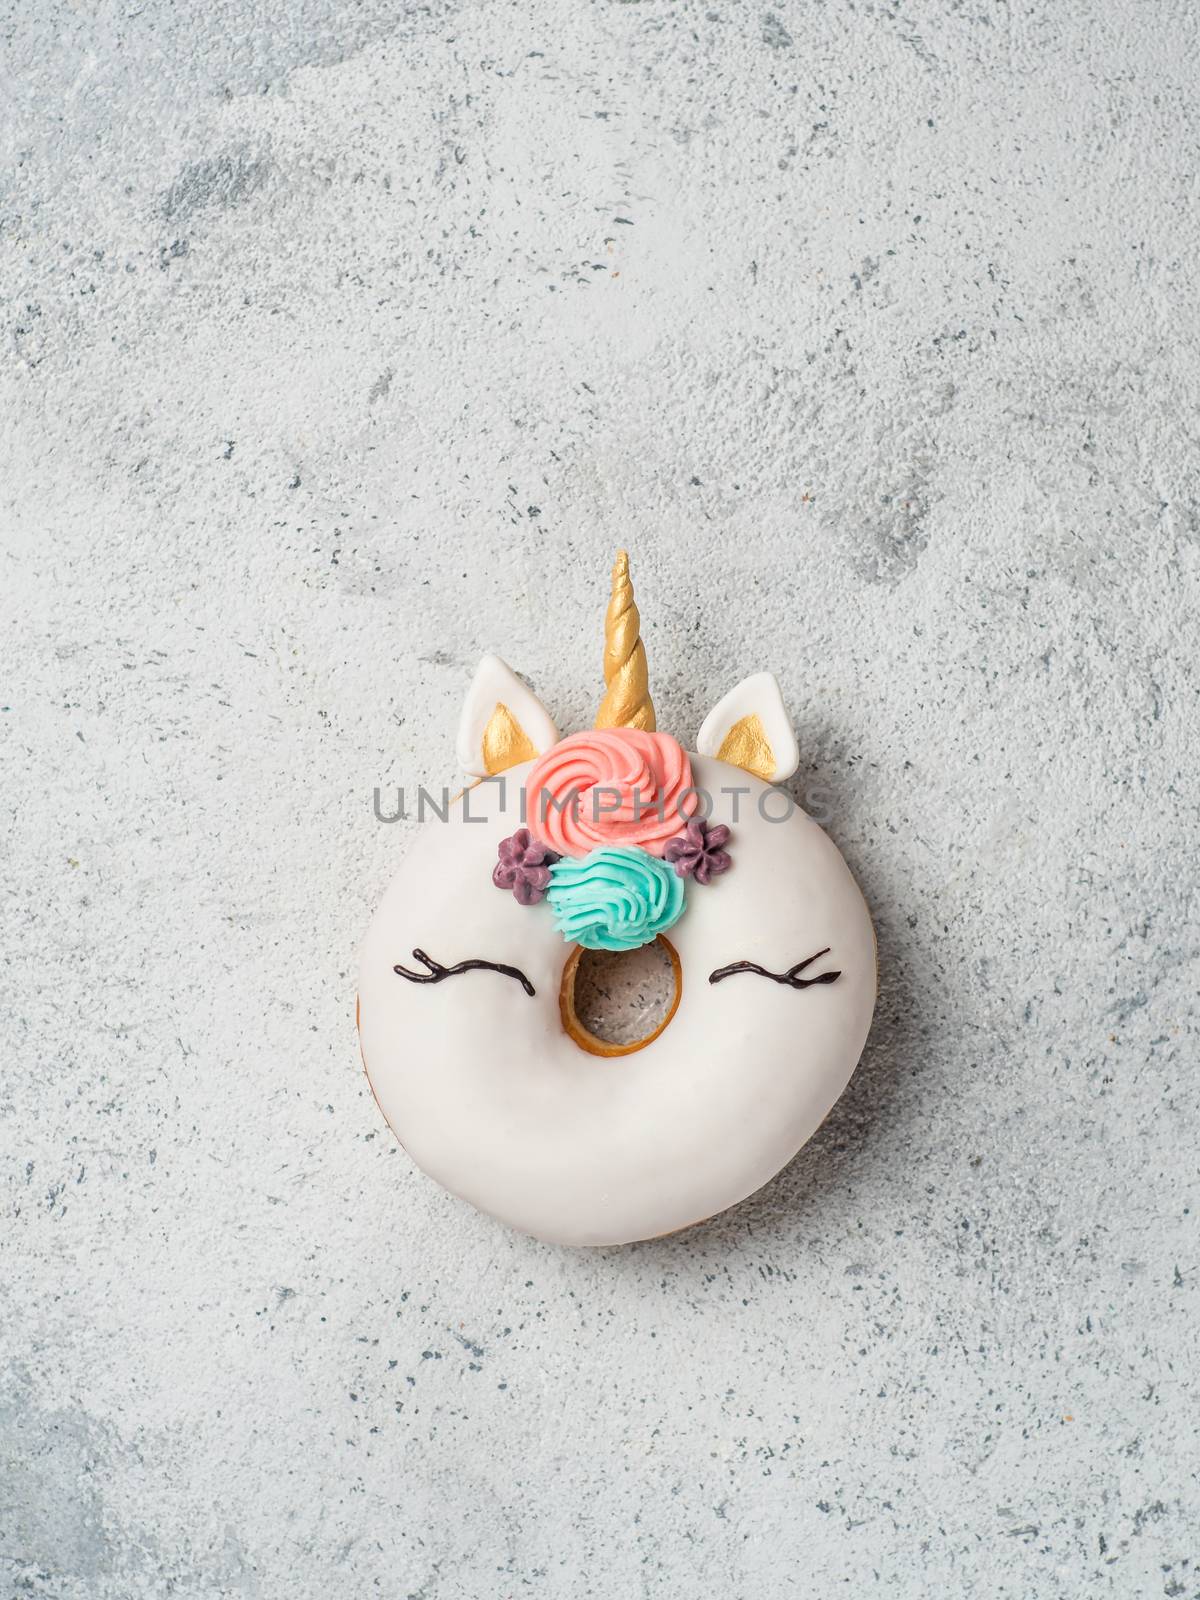 Unicorn donut over gray cement background. Trendy donut unicorn with white glaze. Top view or flat lay. Copy space for text. Vertical.